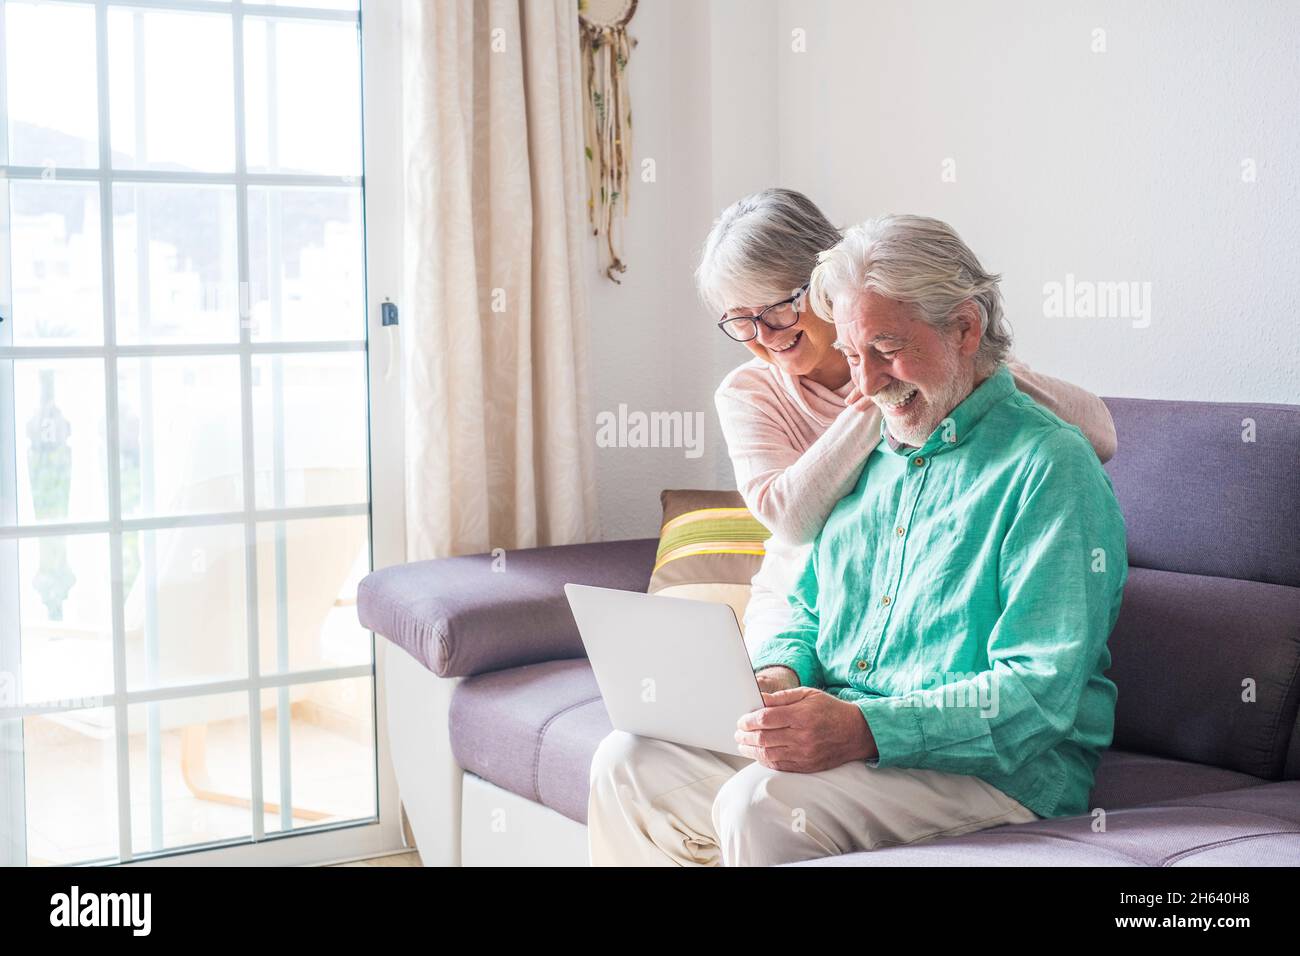 couple of two old and mature people at home using tablet together in sofa. senior use laptop having fun and enjoying looking at it. leisure and free time concept Stock Photo